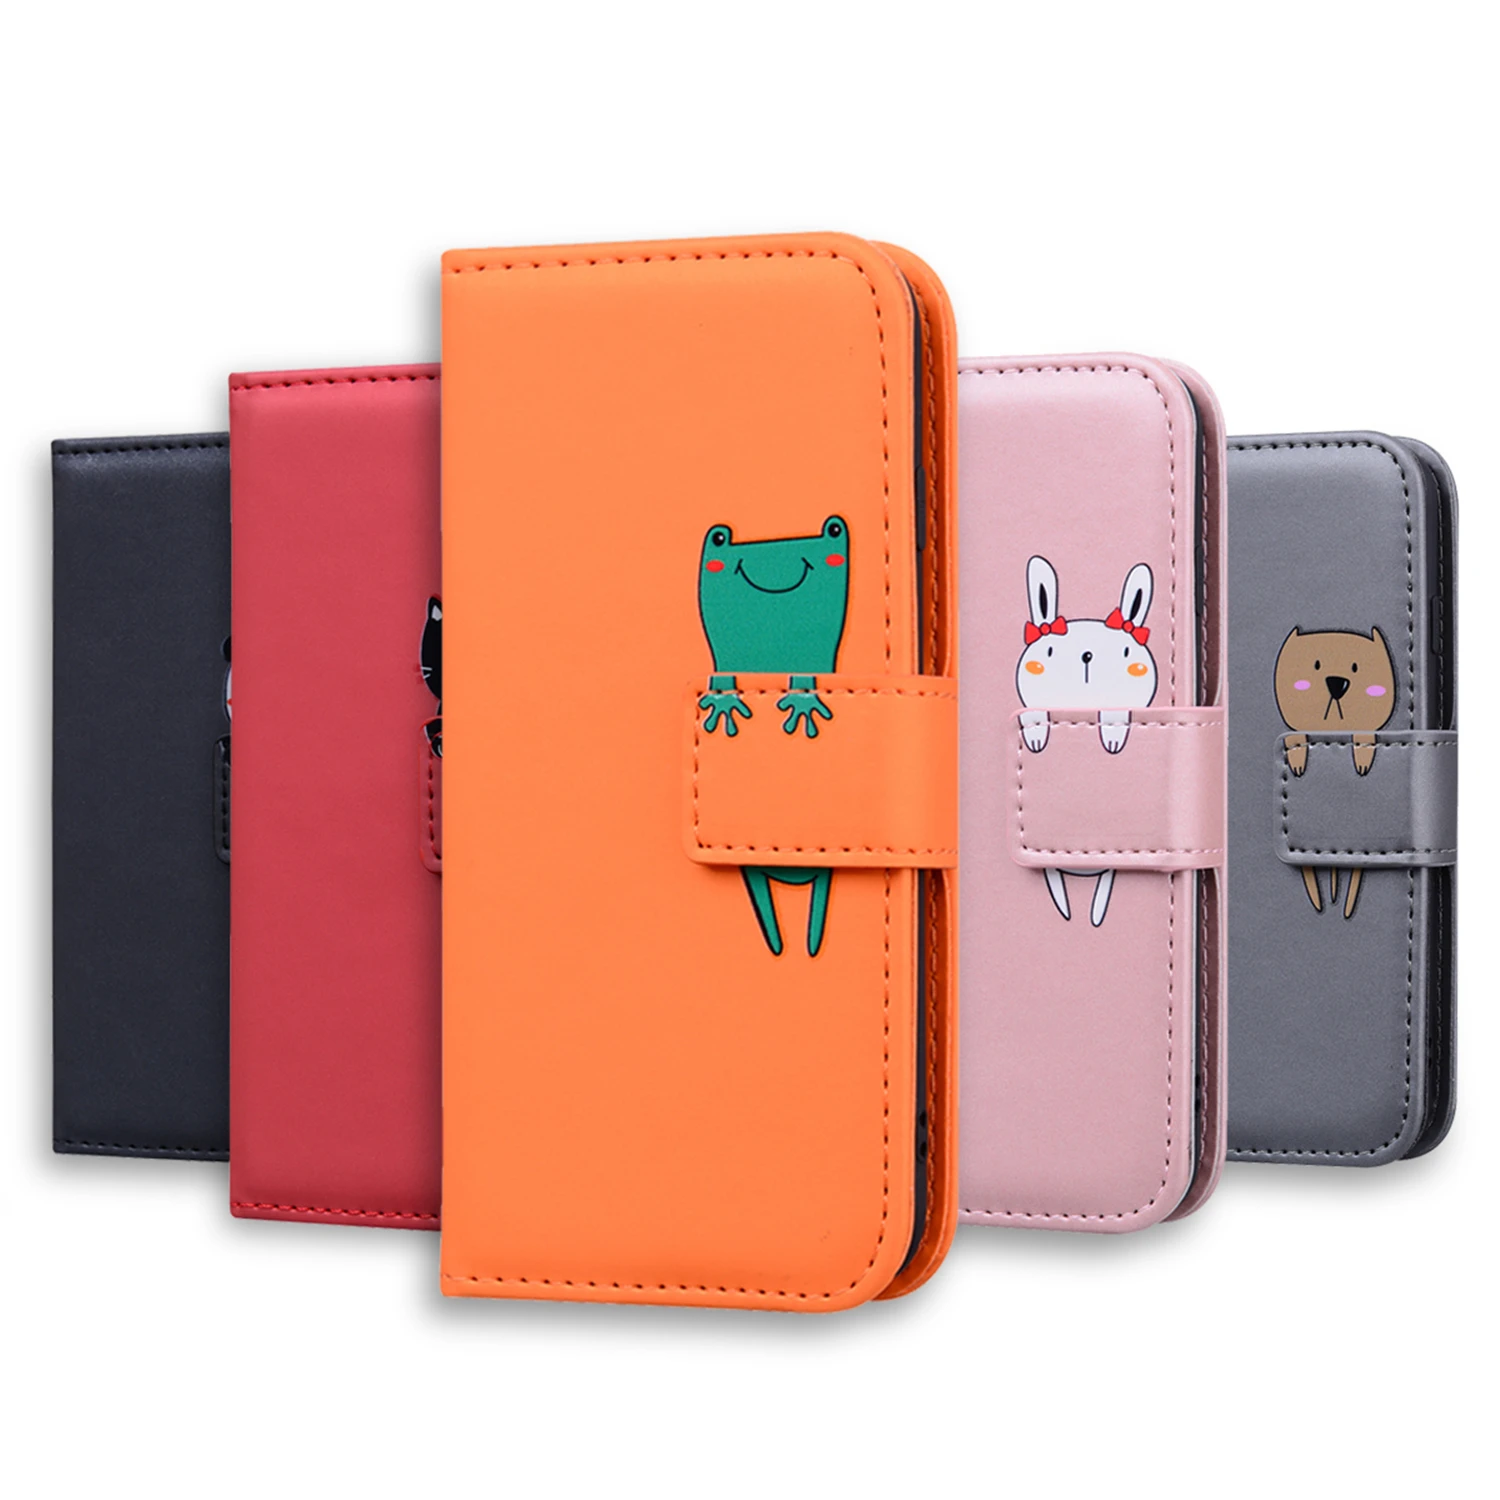 

Cartoon Animal Case For Huawei P40 P30 P20 Pro P9 P10 P20 P30 P40 Lite E Mate 20 Pro Lite Enjoy 10S Y5P Y6P Y7P Y8P Wallet Cover